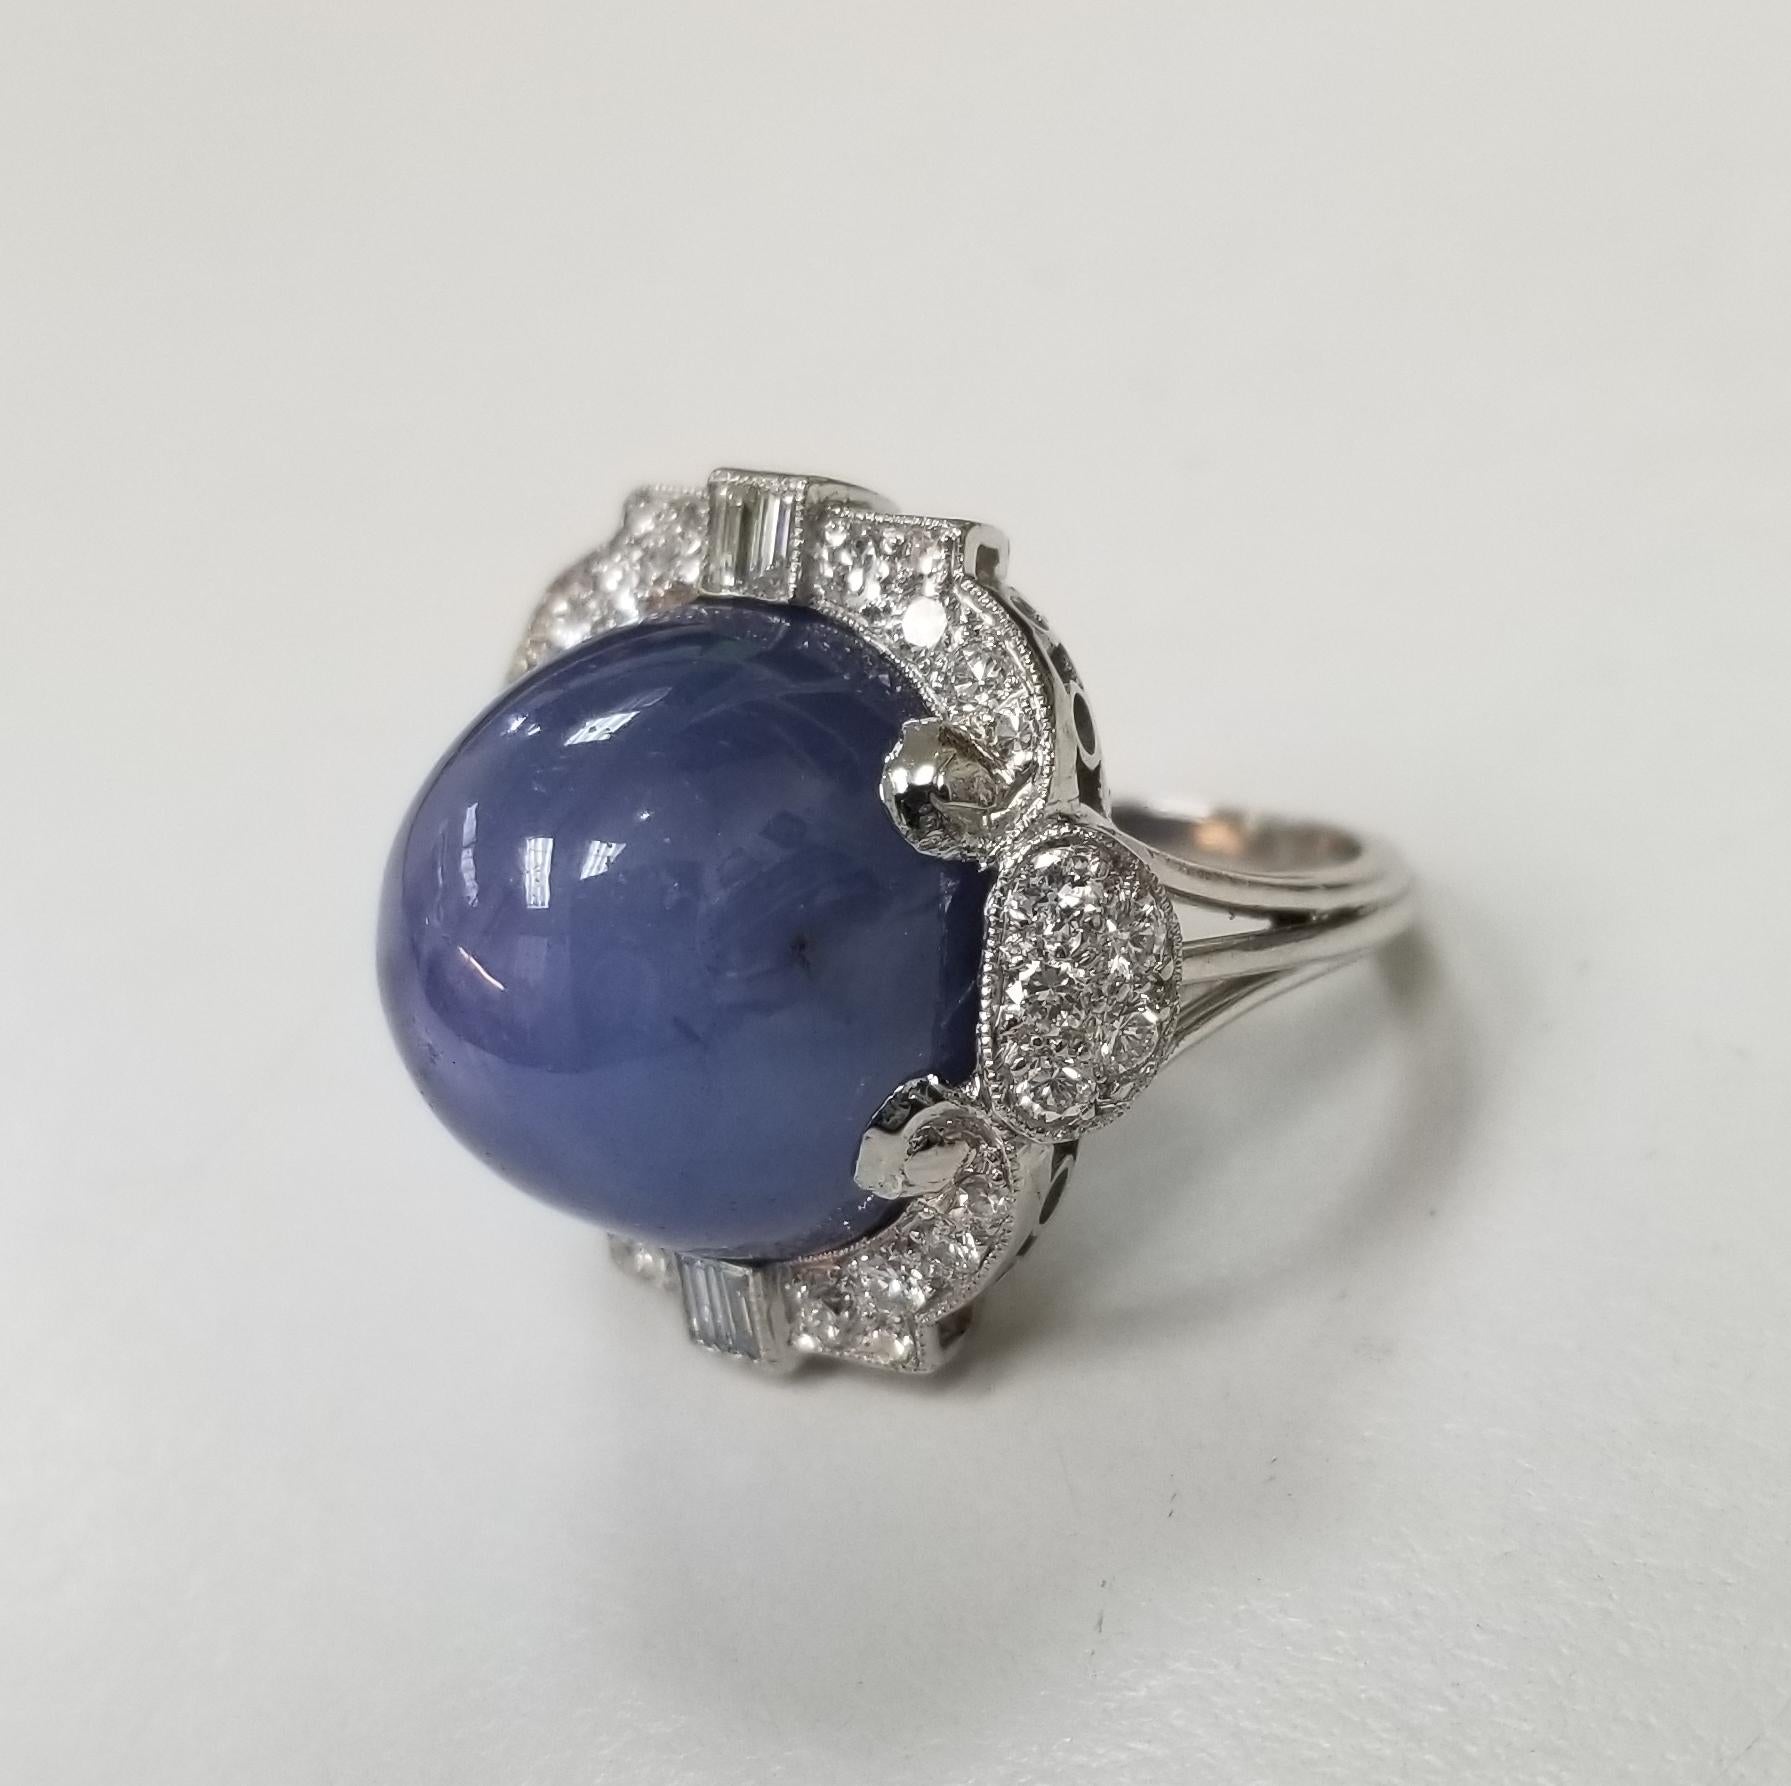 Vintage 1940's translucent 39.77 carat incredible Blue star sapphire Art Deco cocktail ring. Hand made Platinum setting accented with baguette and single cut round diamonds.  GIA certified no heat, no enhancements.

*Motivated to Sell – Please make